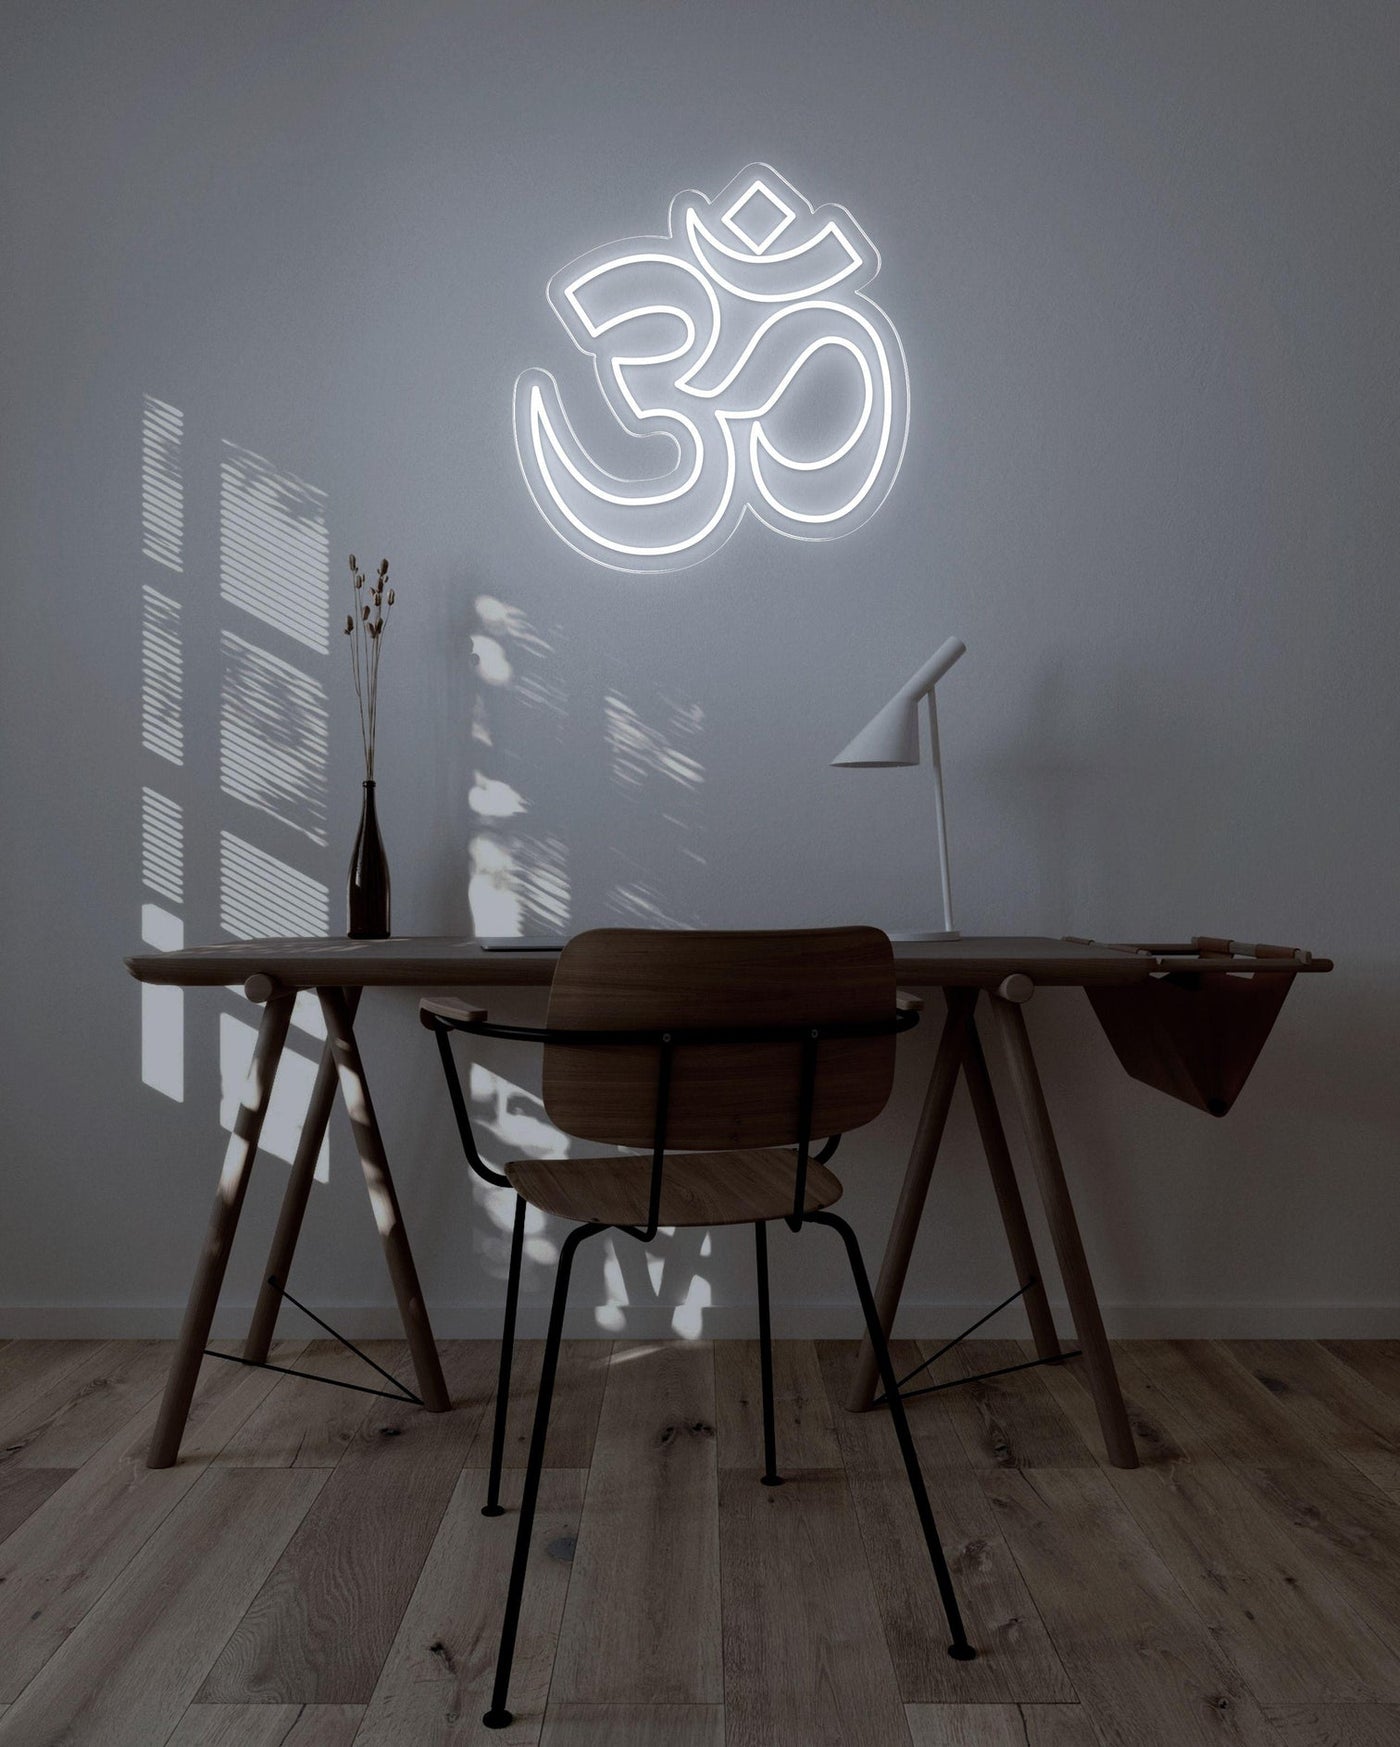 OM LED neon sign - 22inch x 22inchTurquoise